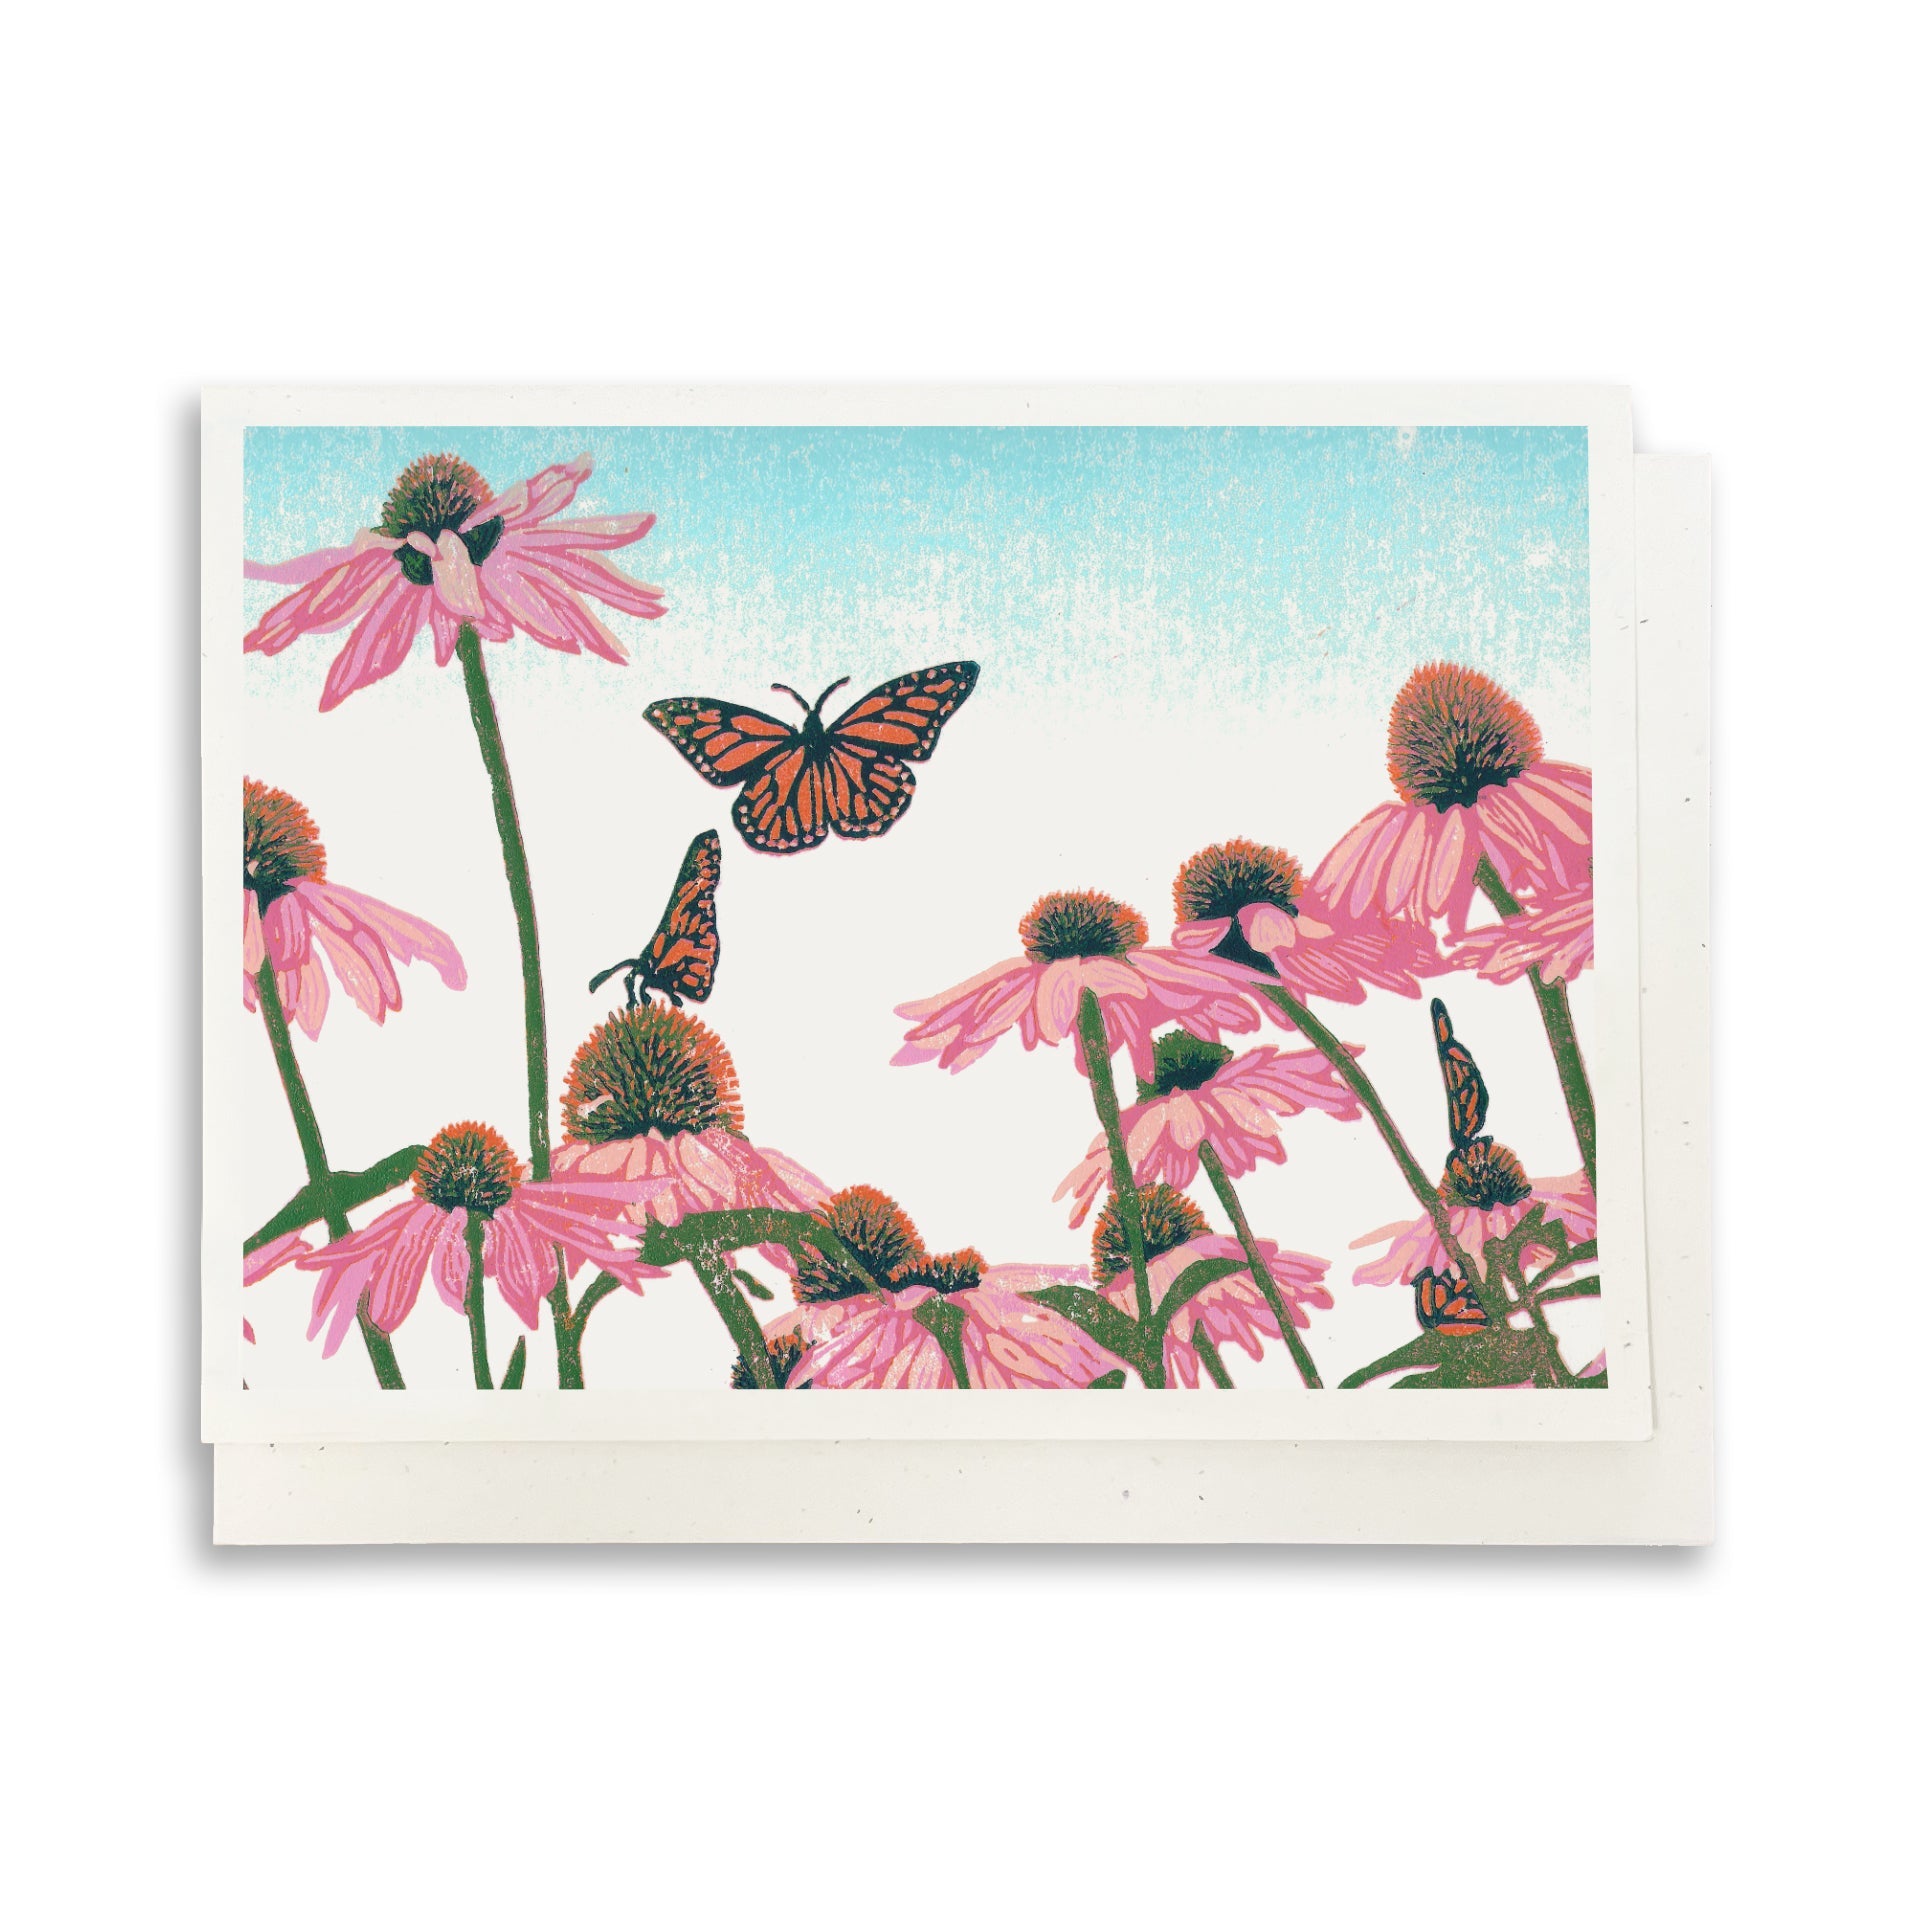 A casually elegant card featuring a digital reproductions of Natalia Wohletz's block print design titled Coneflower Patch.